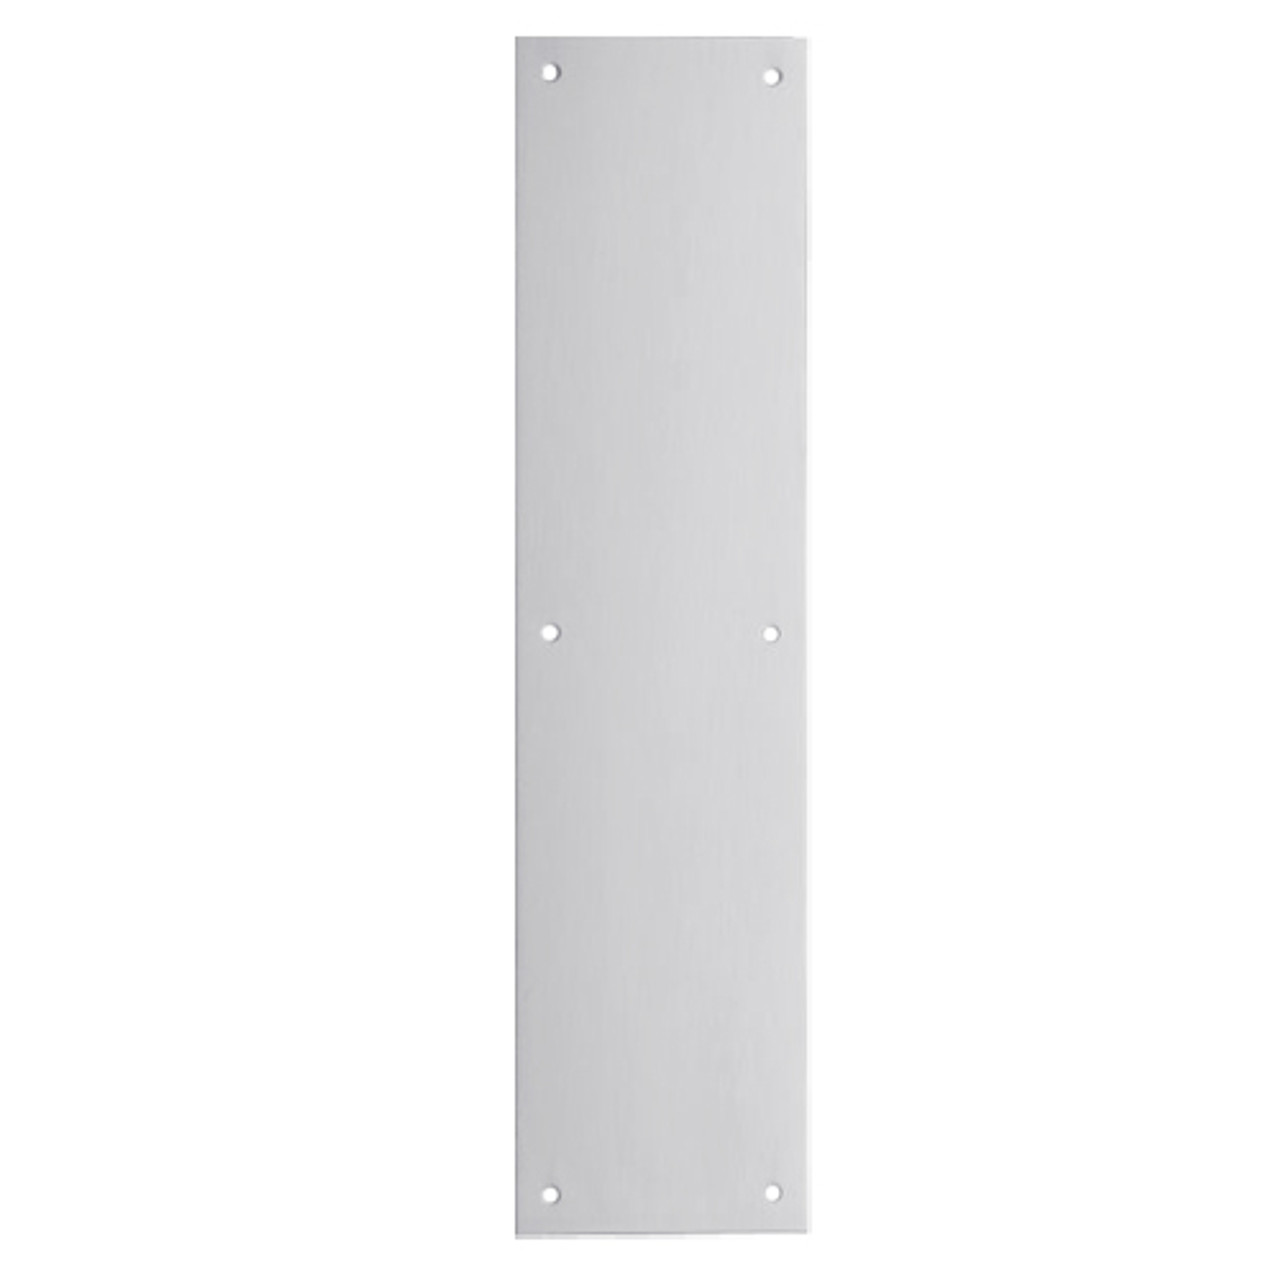 8200-US26D-6x16 IVES Architectural Door Trim 6x16 Inch Push Plate in Satin Chrome